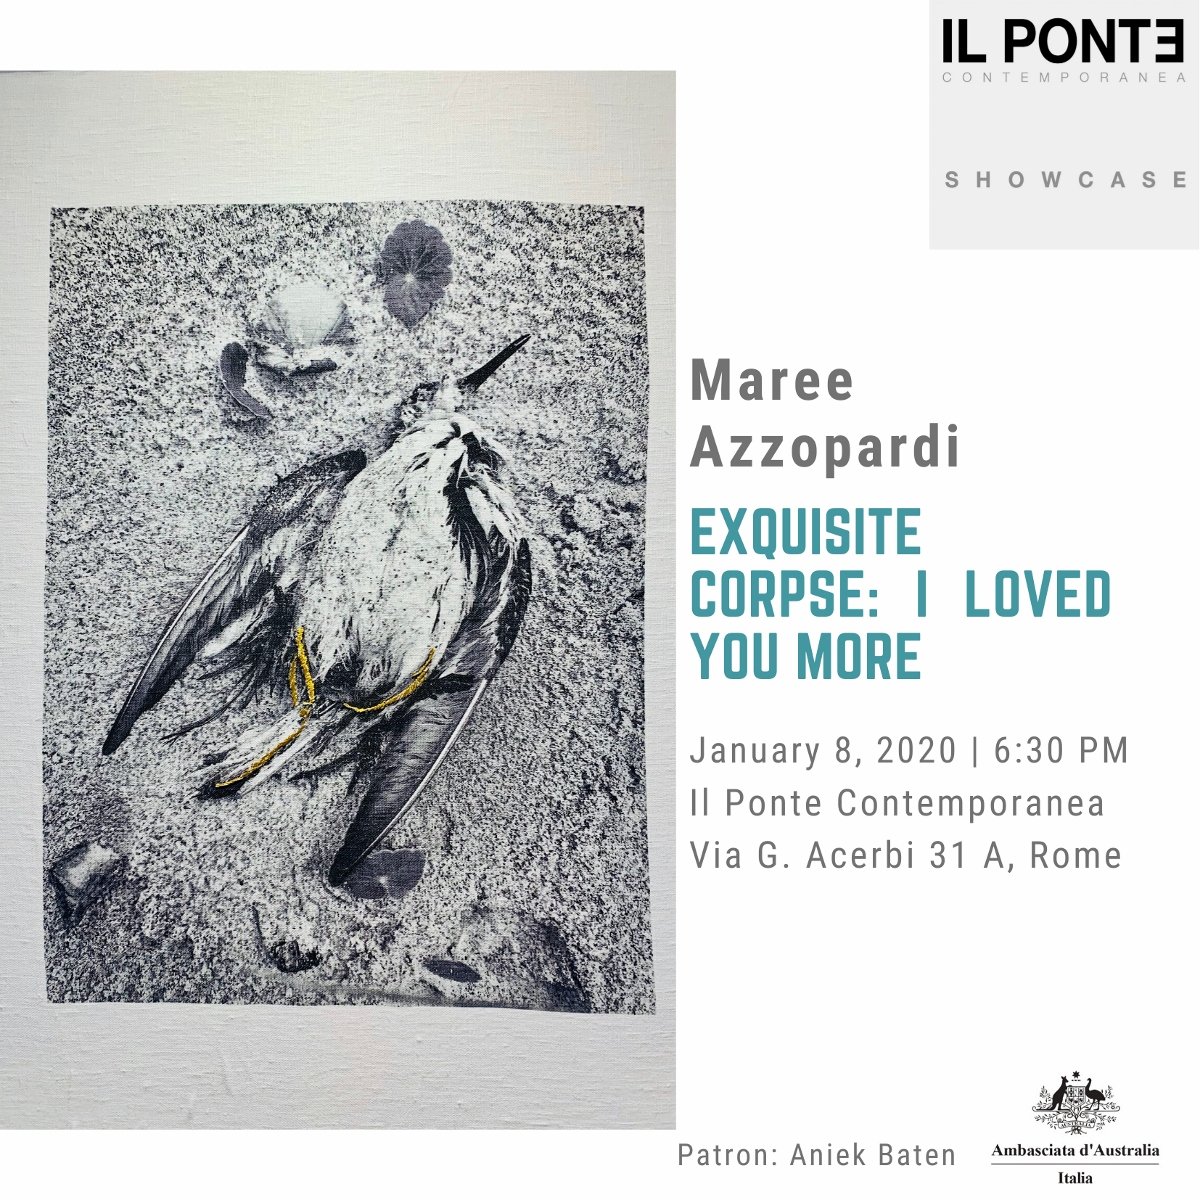 Maree Azzopardi - Exquisite Corpse: I loved you more